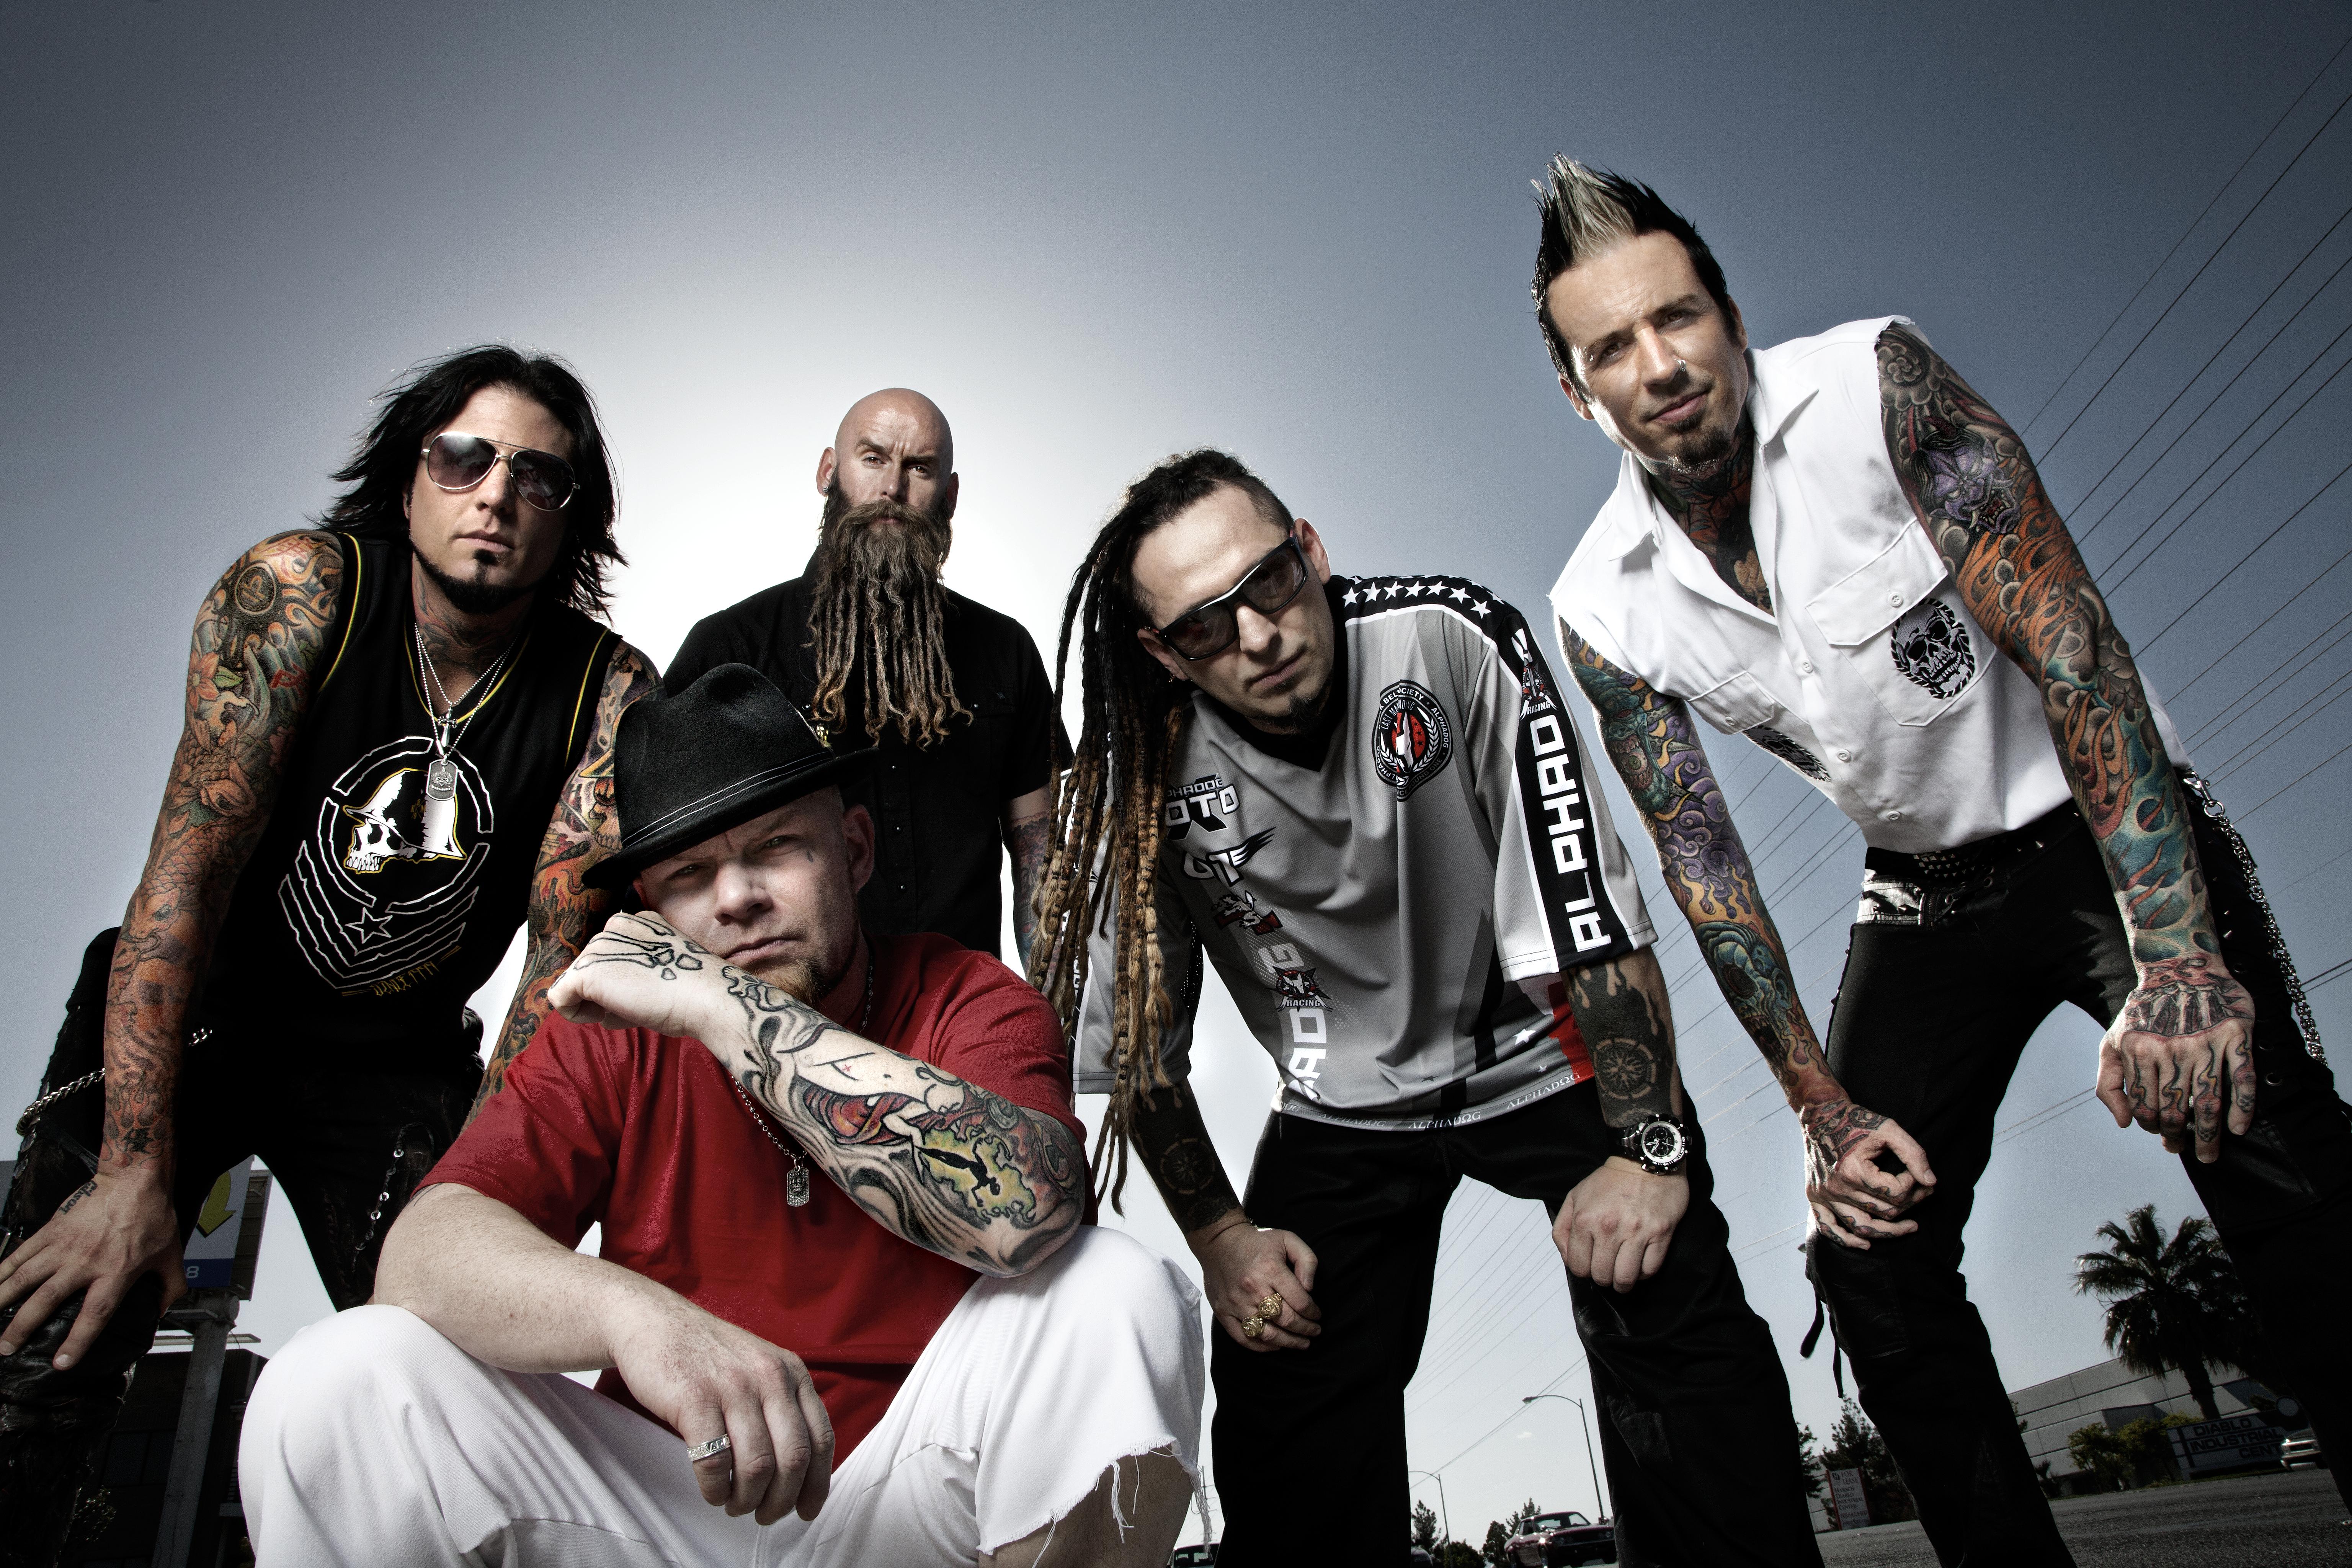 With 6 Golden God nominations and finishing an arena tour, FFDP are back.